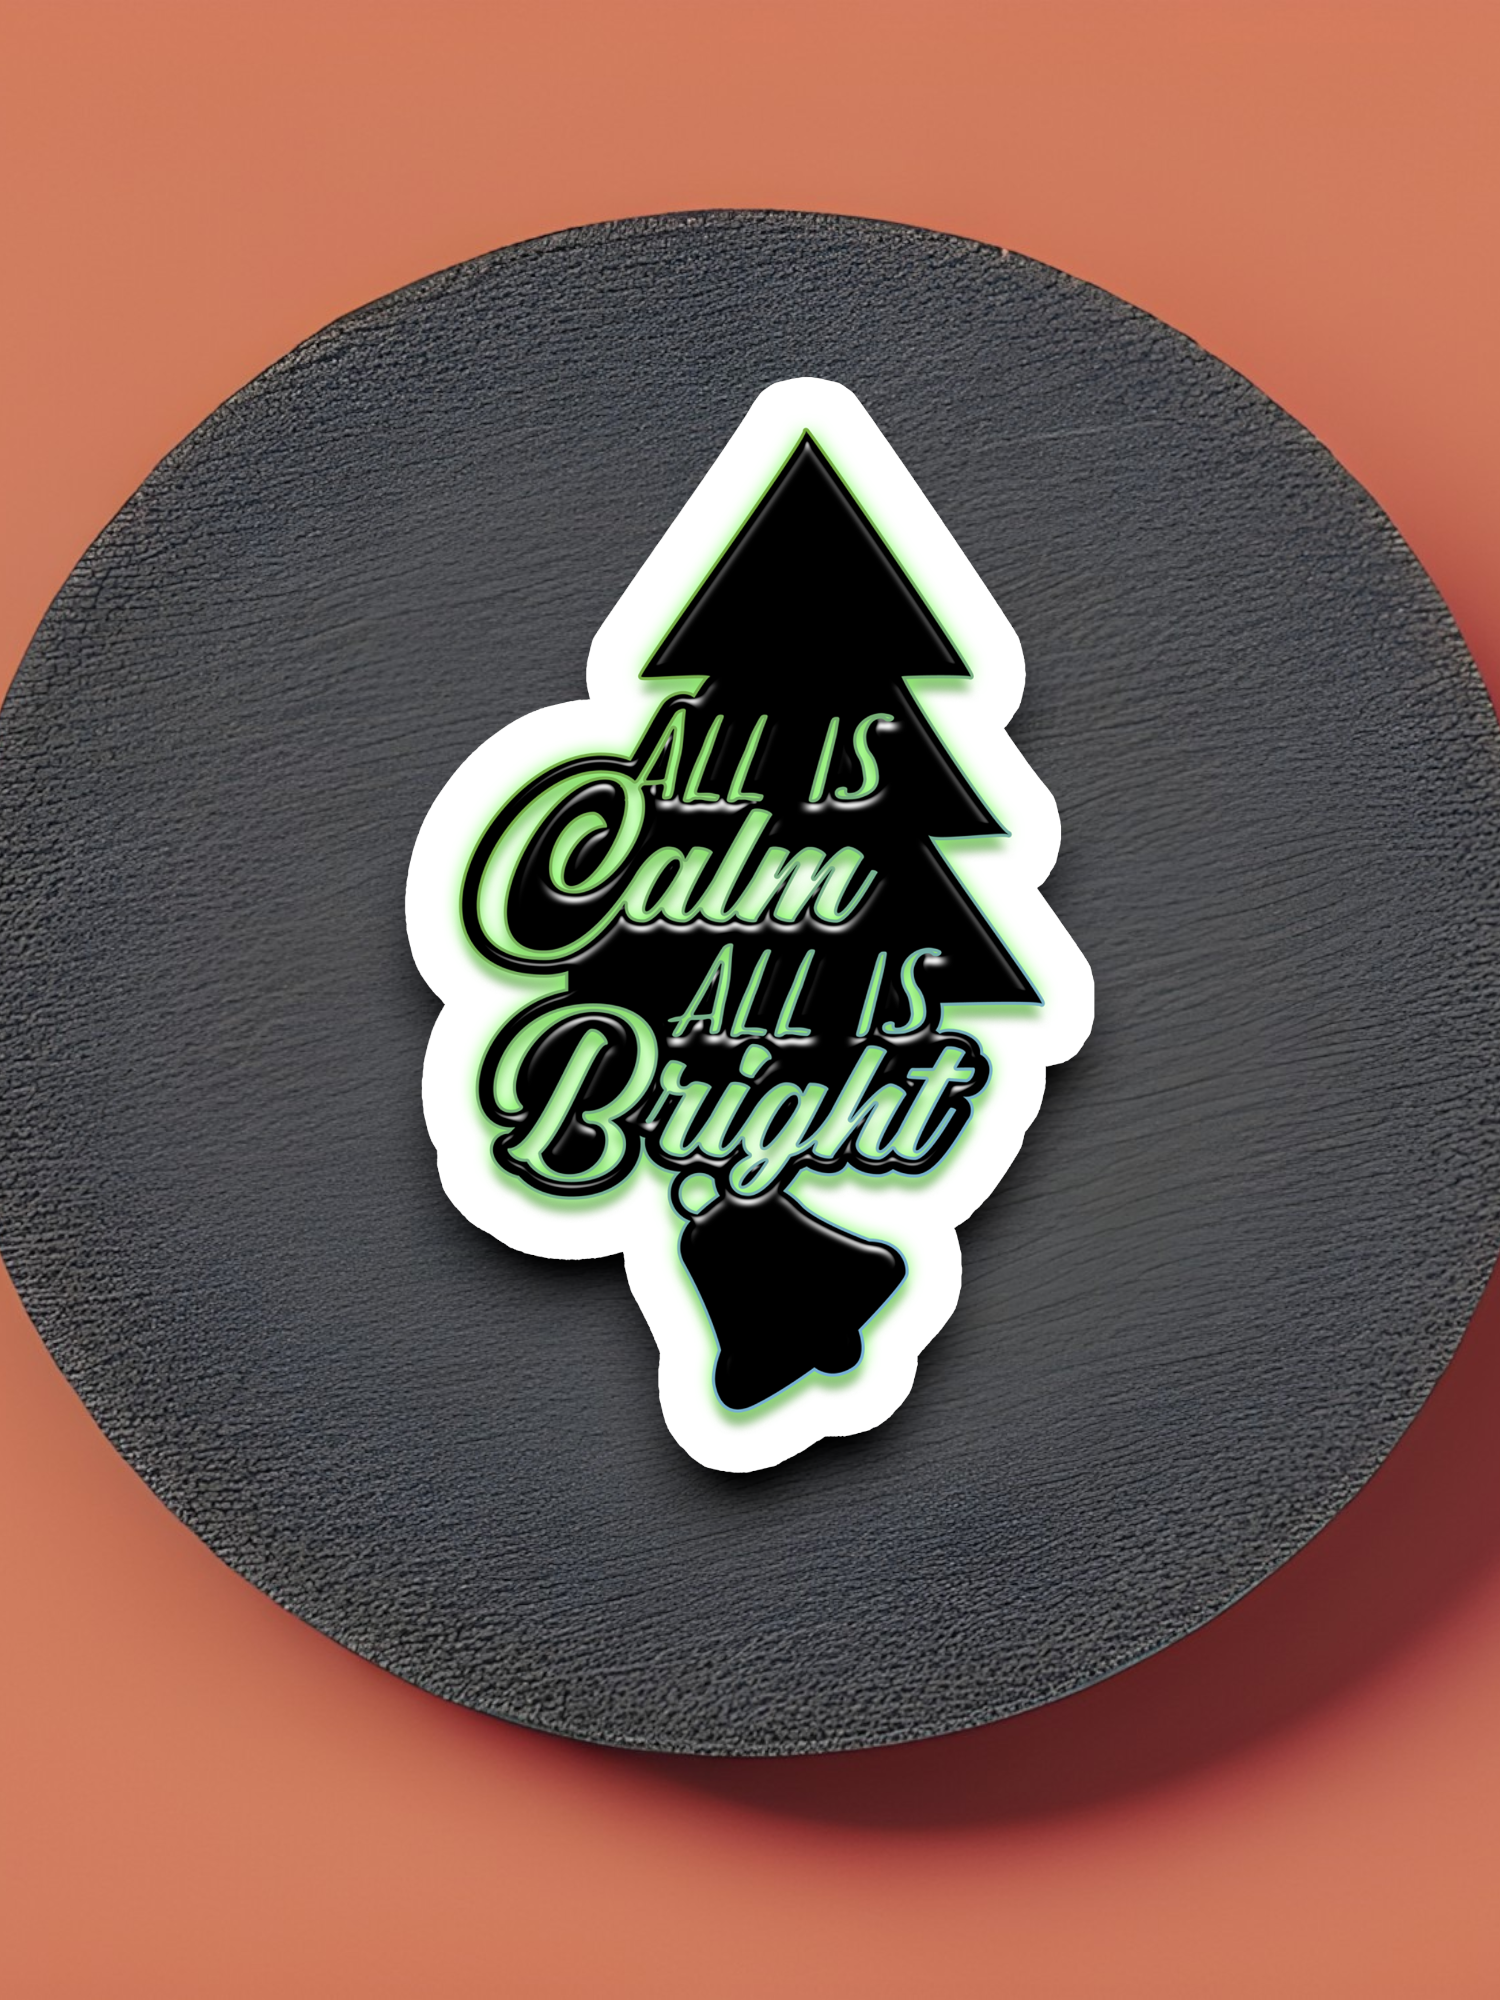 All is Calm All is Bright - Holiday Sticker